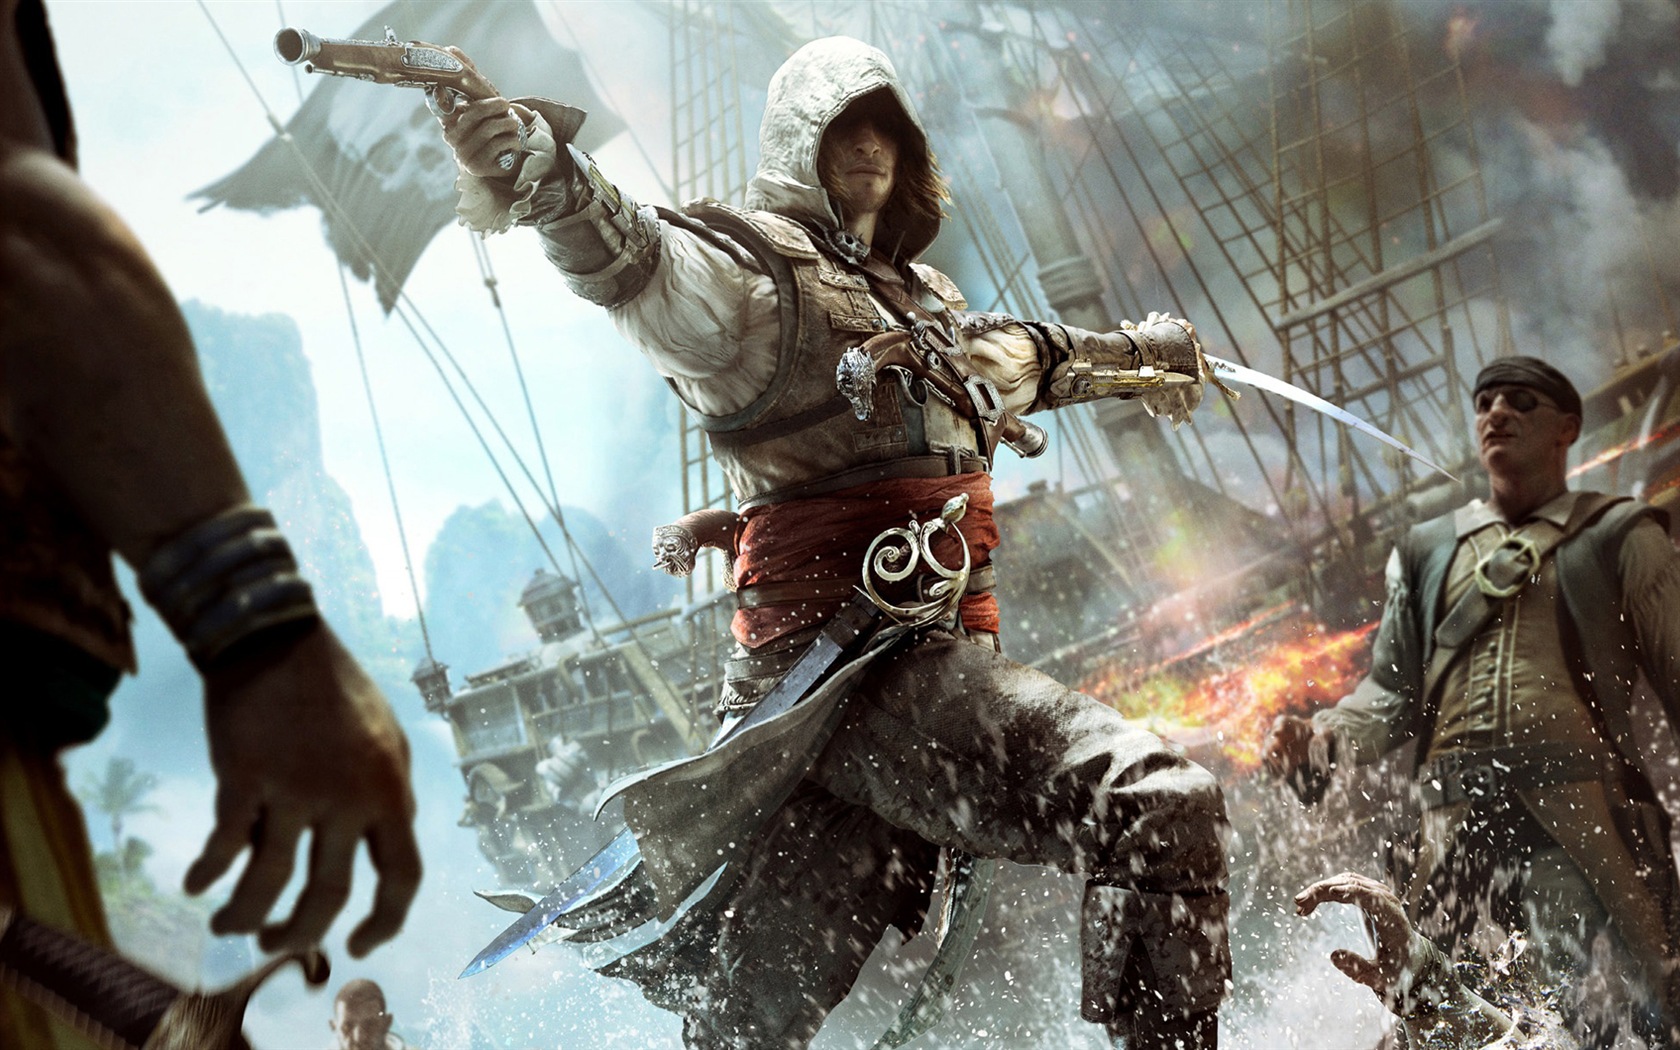 Creed IV Assassin: Black Flag HD wallpapers #6 - 1680x1050